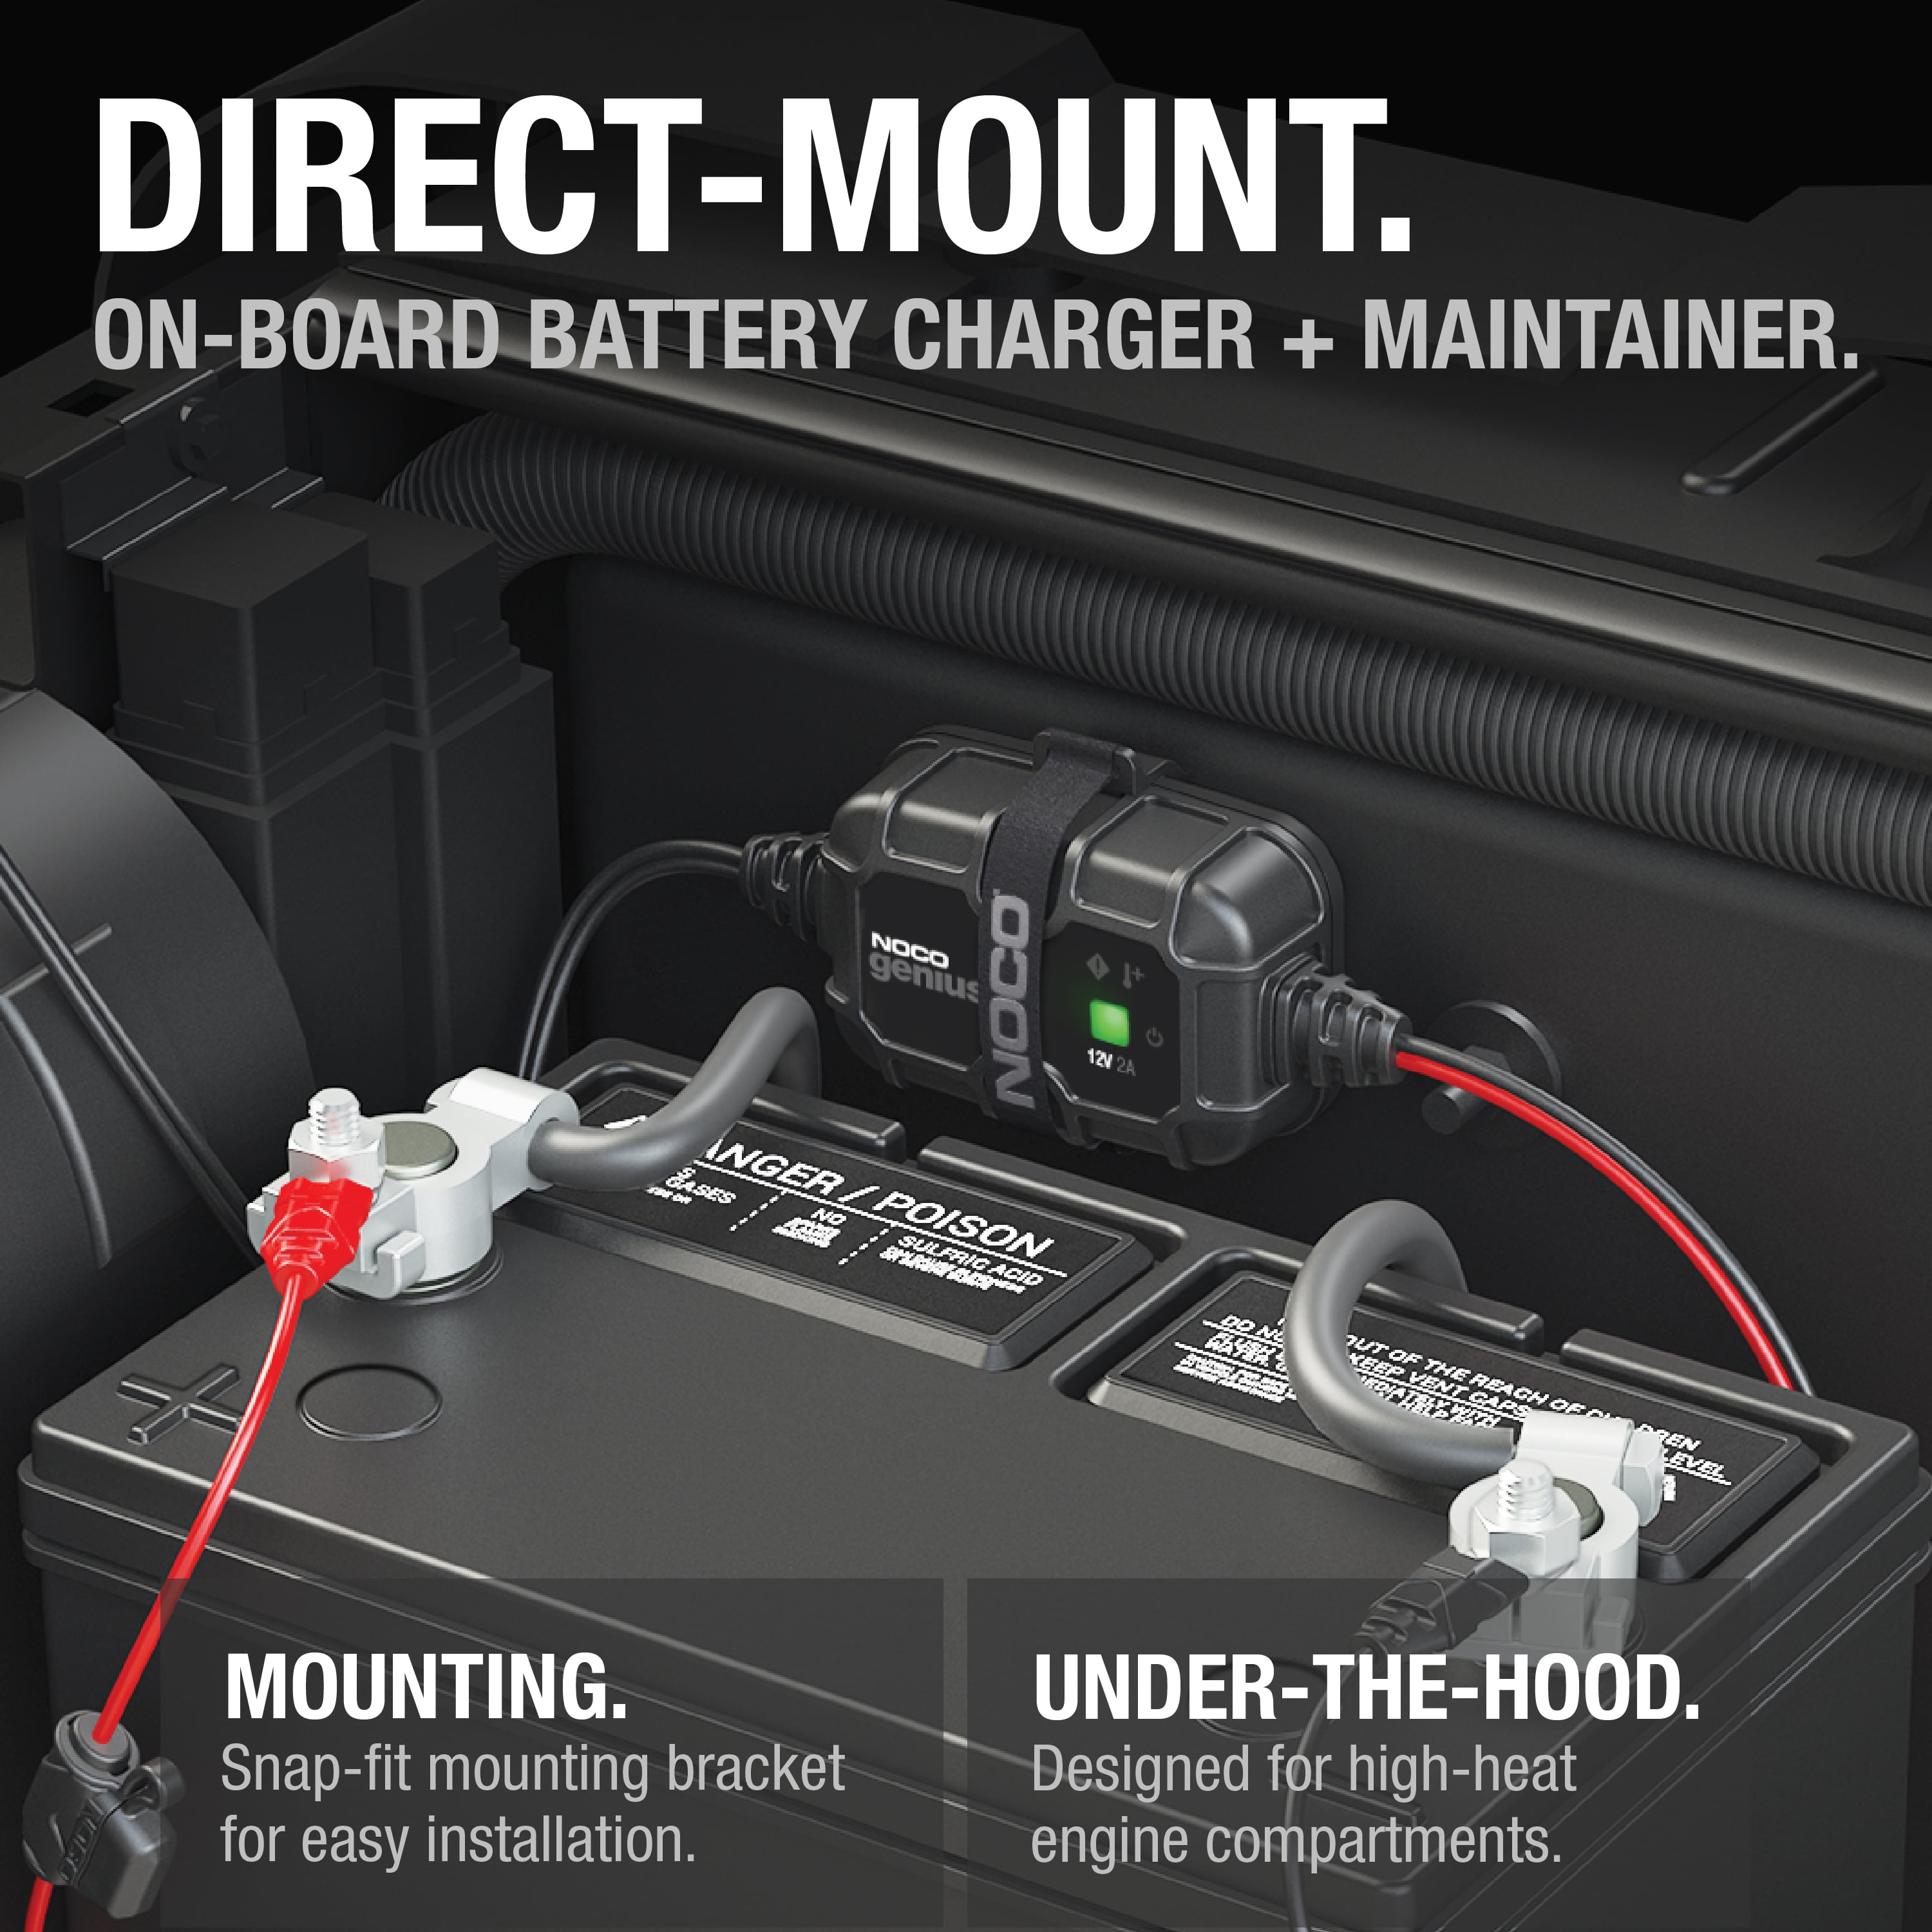 NOCO GENIUS2D 2A Direct-Mount Onboard Battery Charger and